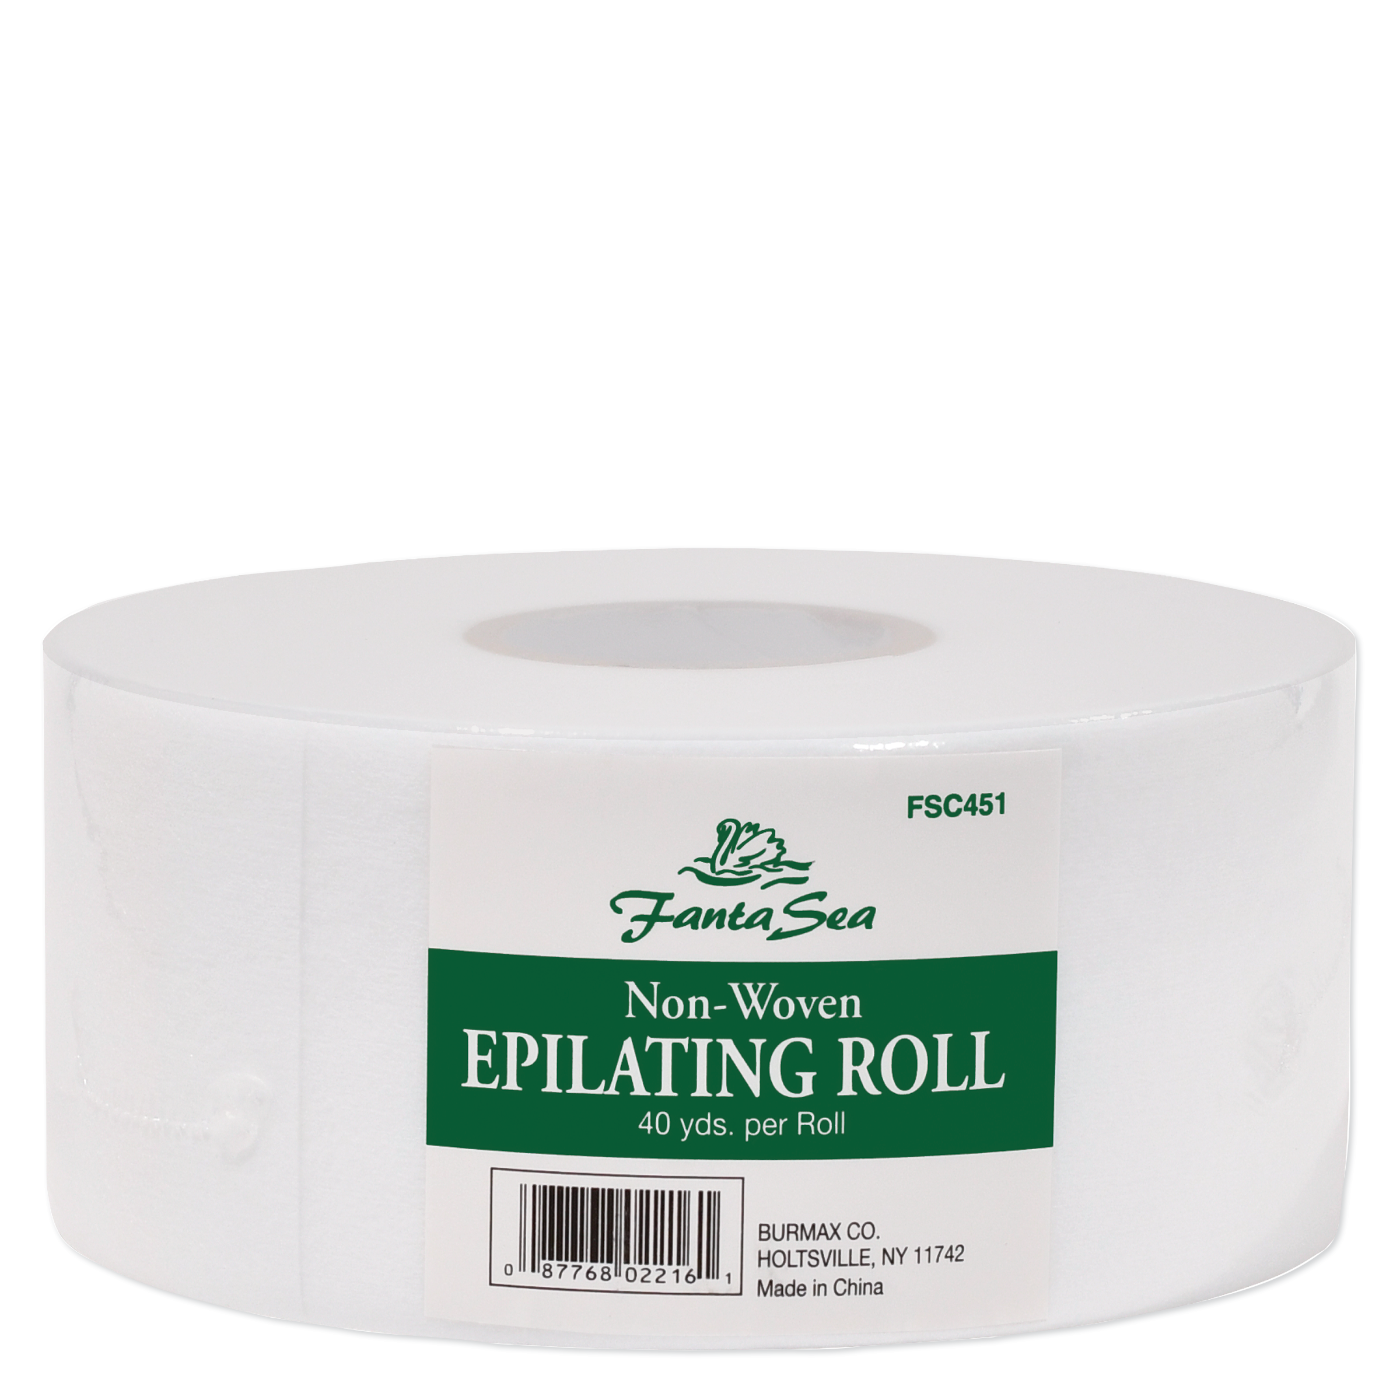 Non-Woven Epilating Roll - 40 yards